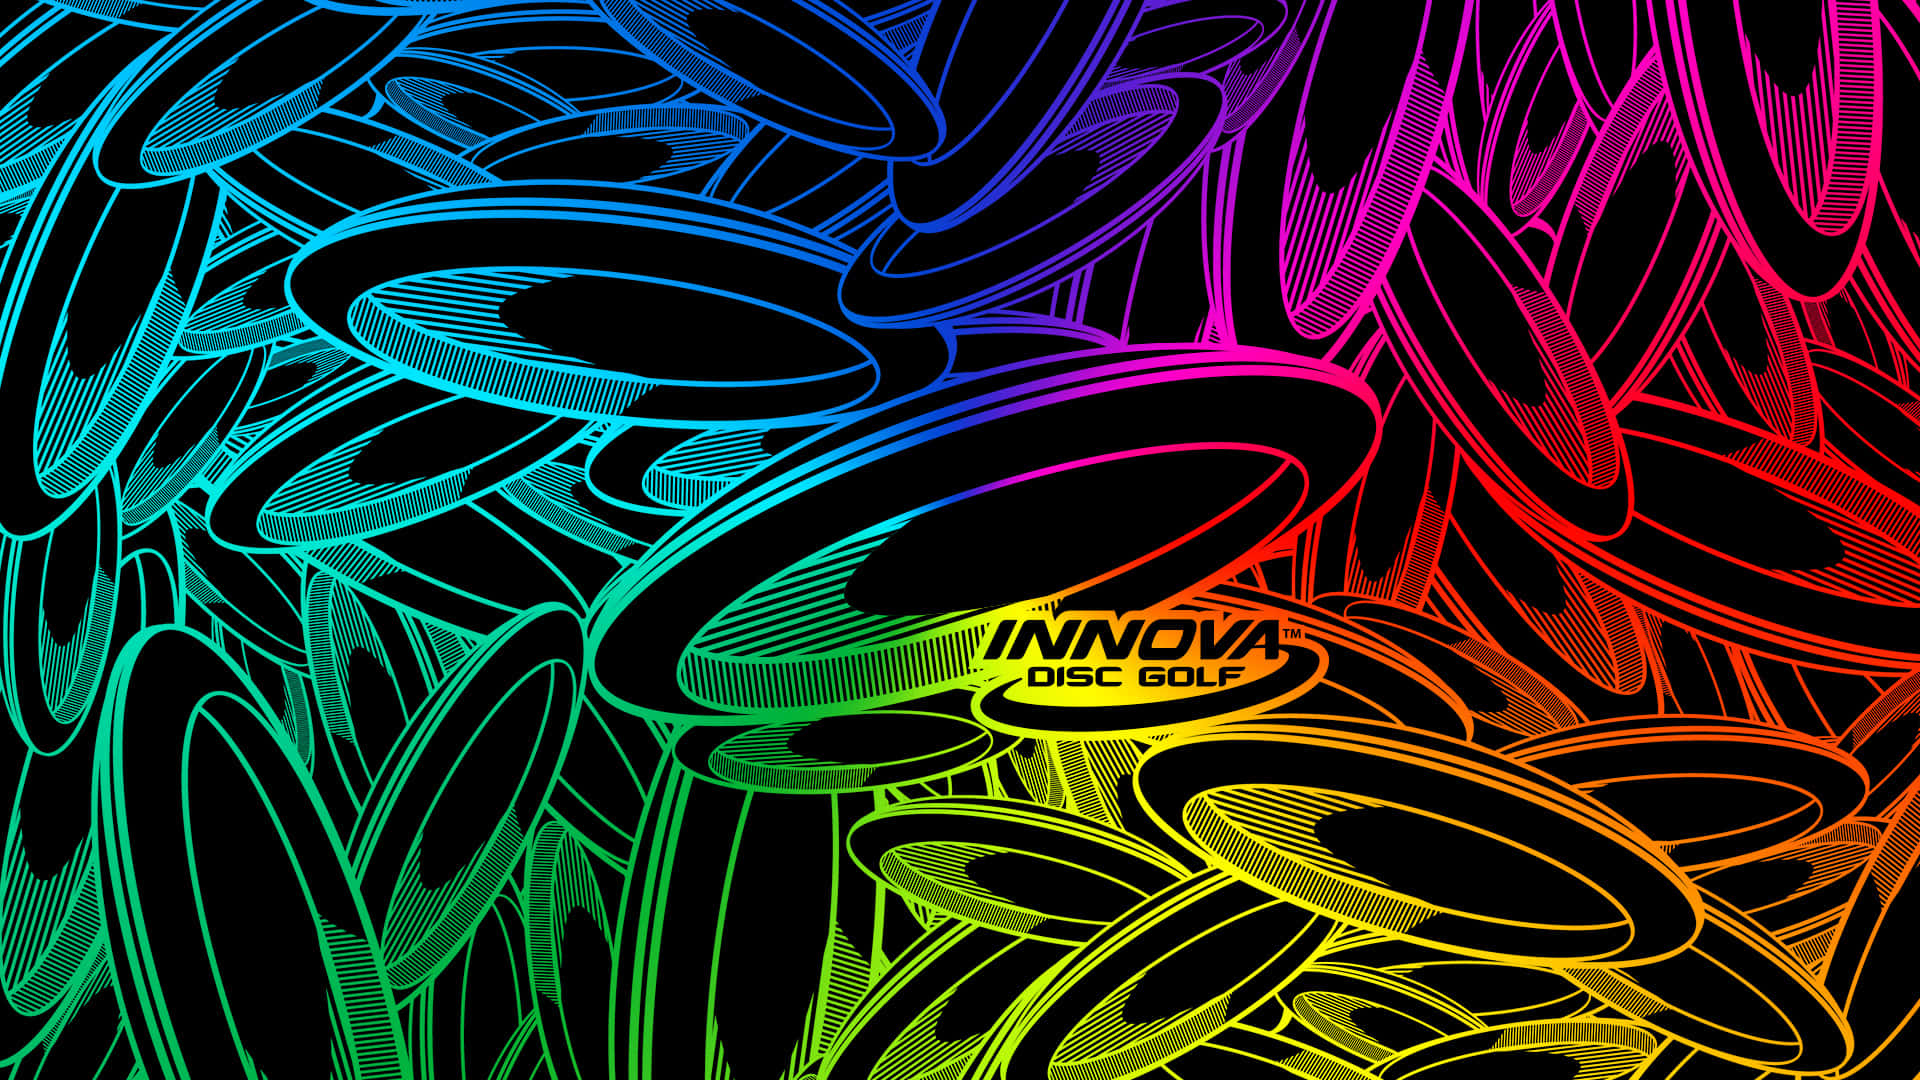 Creative Disc Golfs 1920x1080 Ultimate Frisbee Background